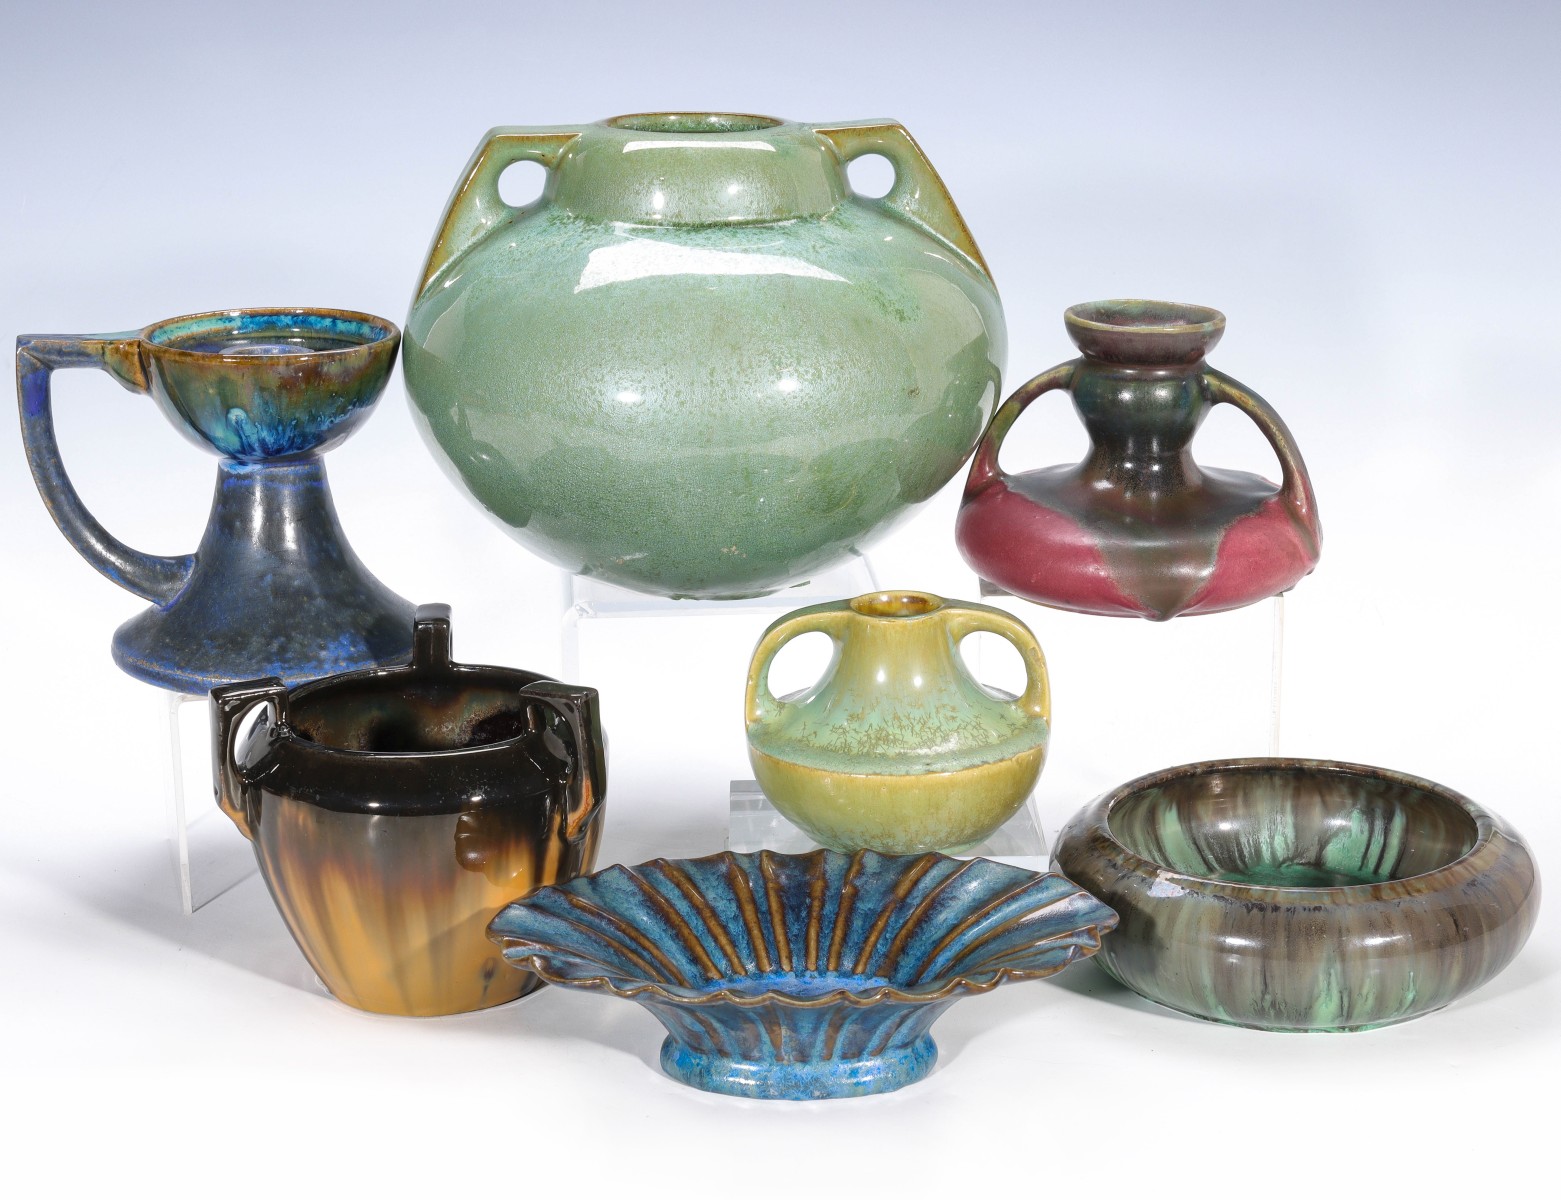 A LARGE AND VARIED COLLECTION OF FINE FULPER ART POTTER